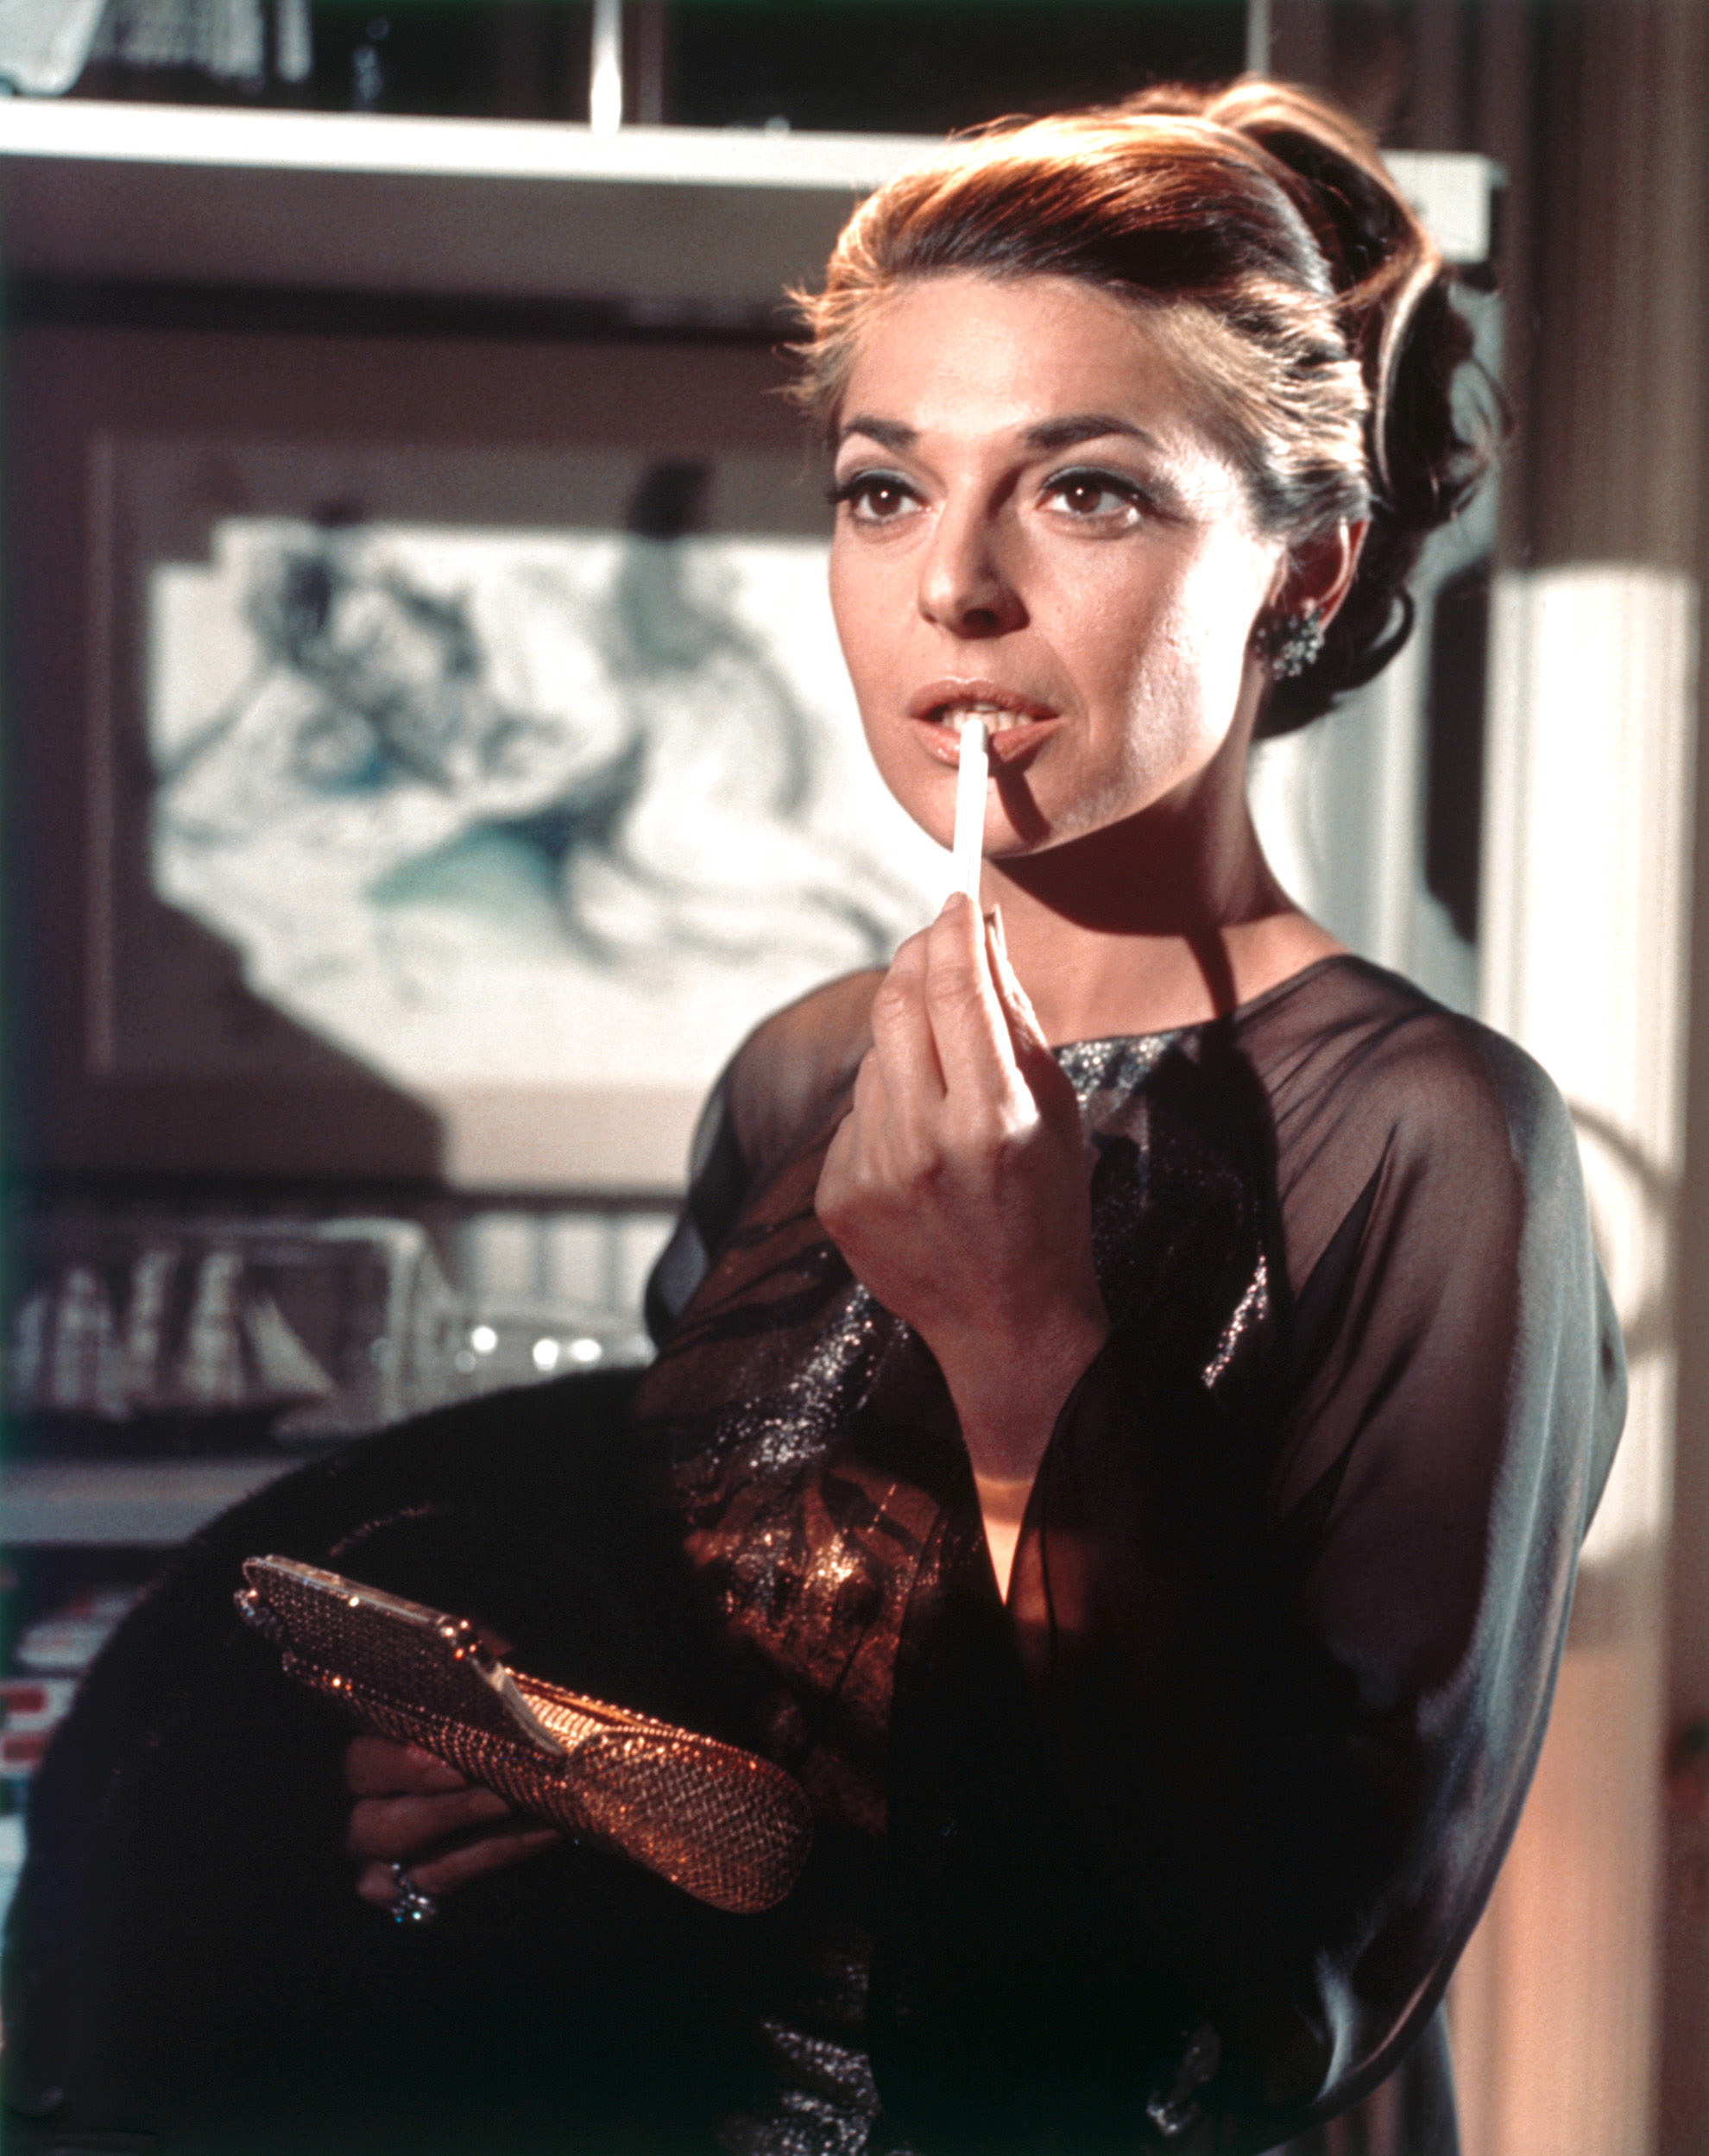 mrs. robinson holding a smoke and her clutch